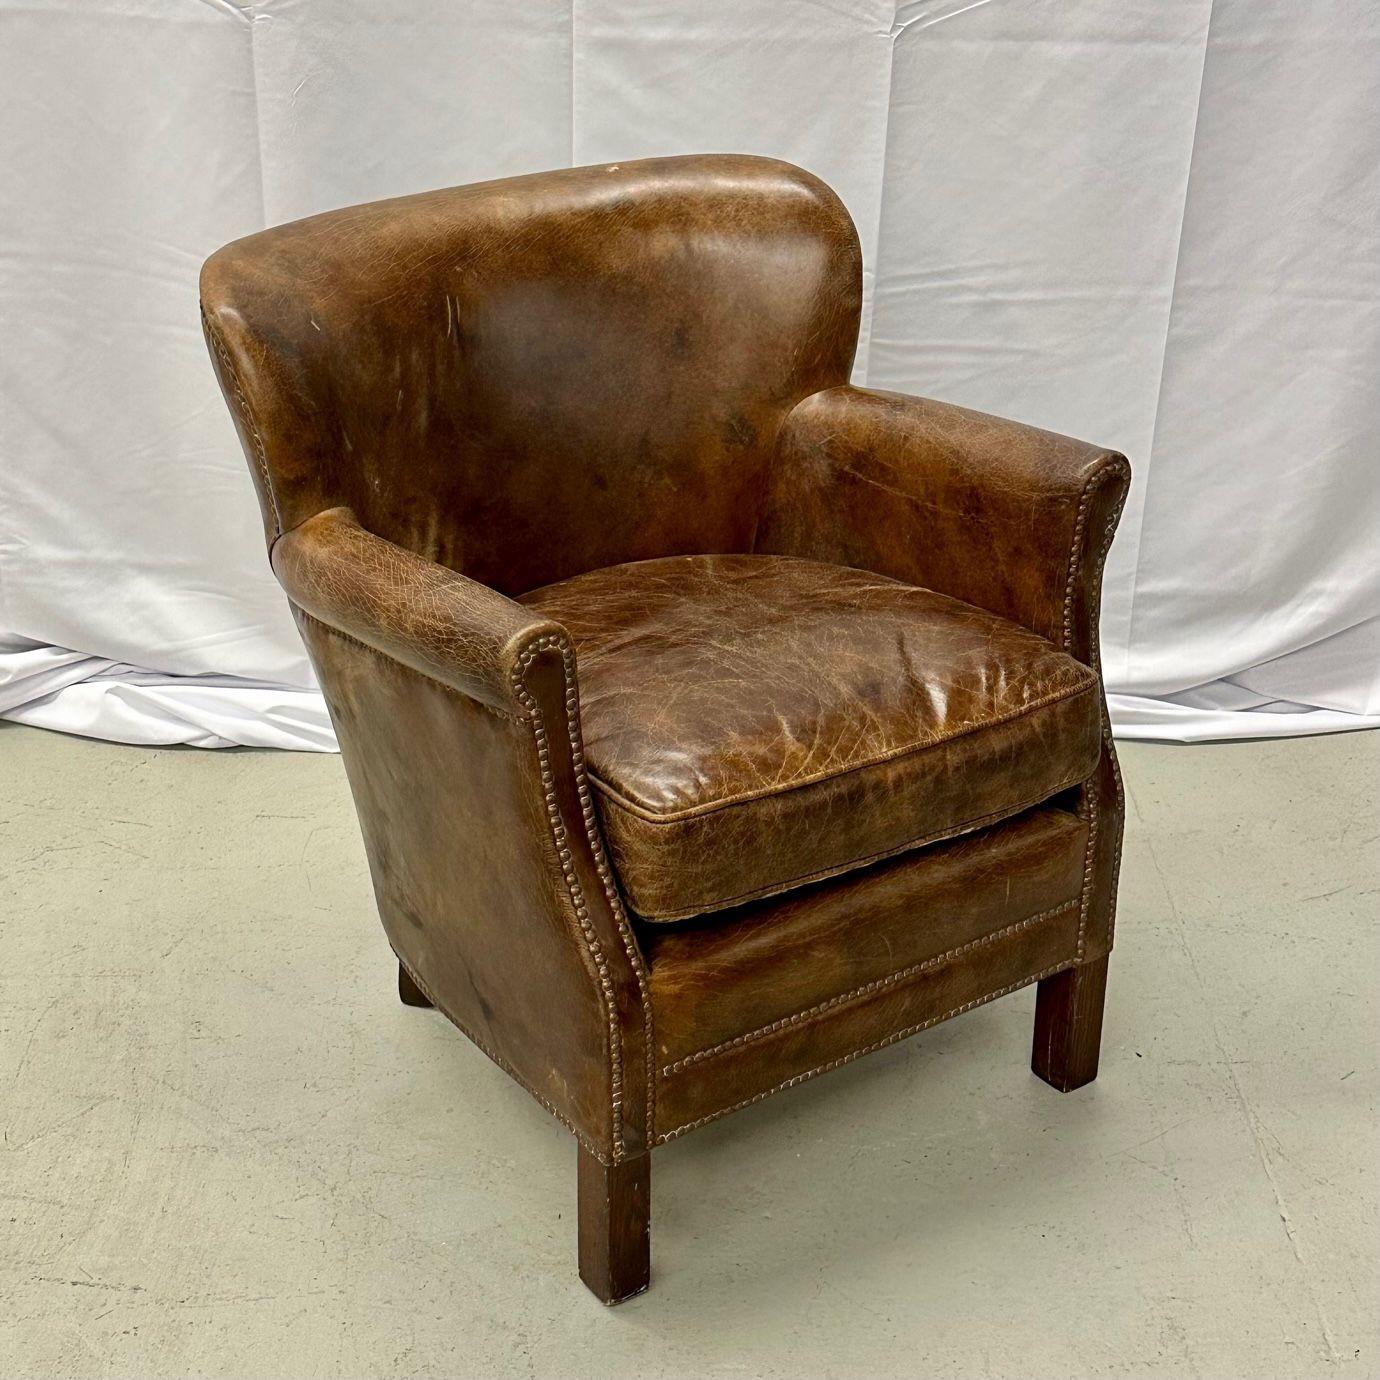 20th Century Petite Danish Style Distressed Leather Club / Lounge / Arm / Desk Chair